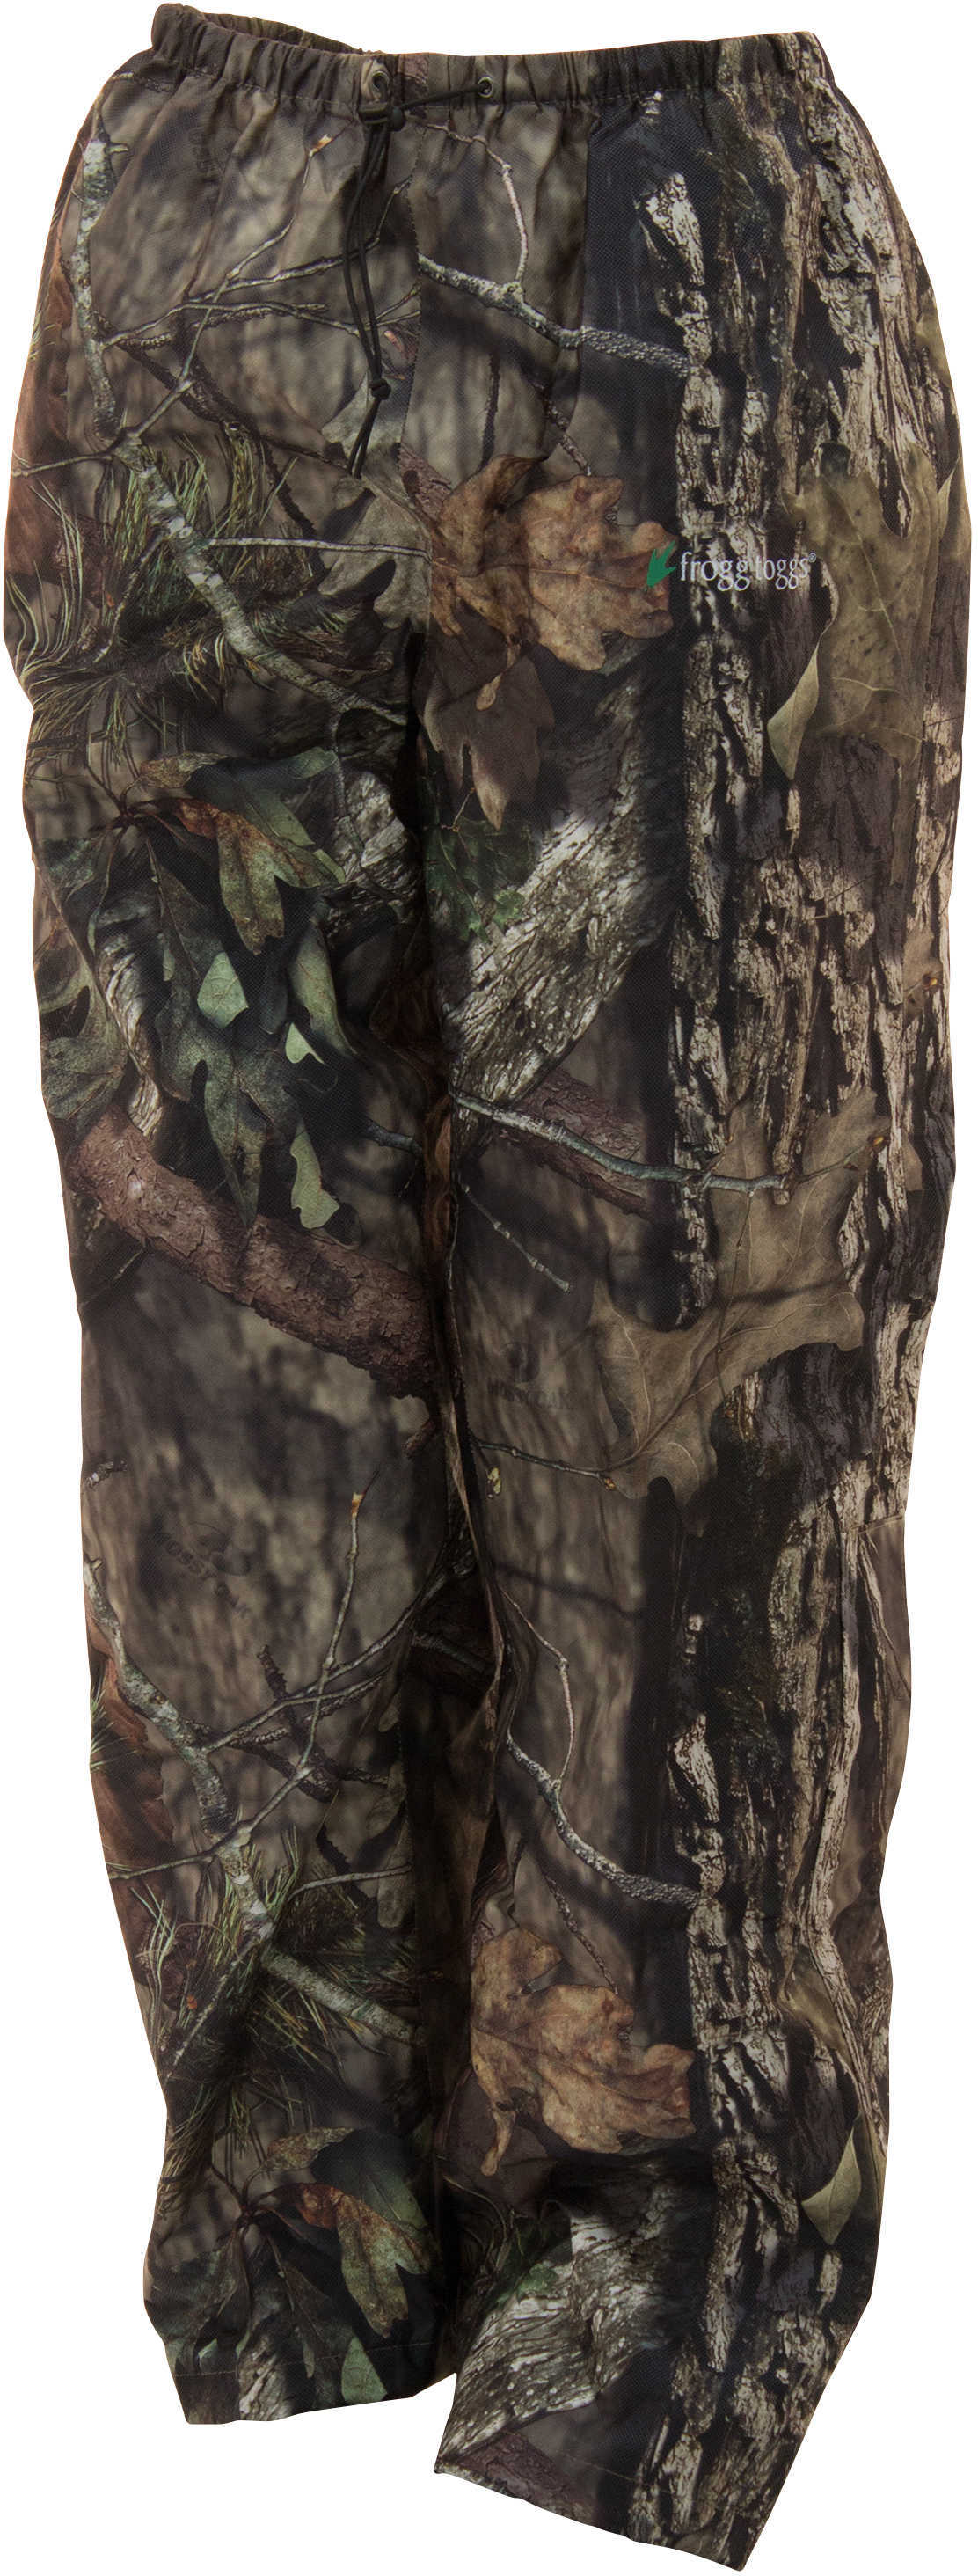 Frogg Toggs Pro Action Camo Pants Mossy Oak Break Up Country, Medium Md: PA83102-62MD